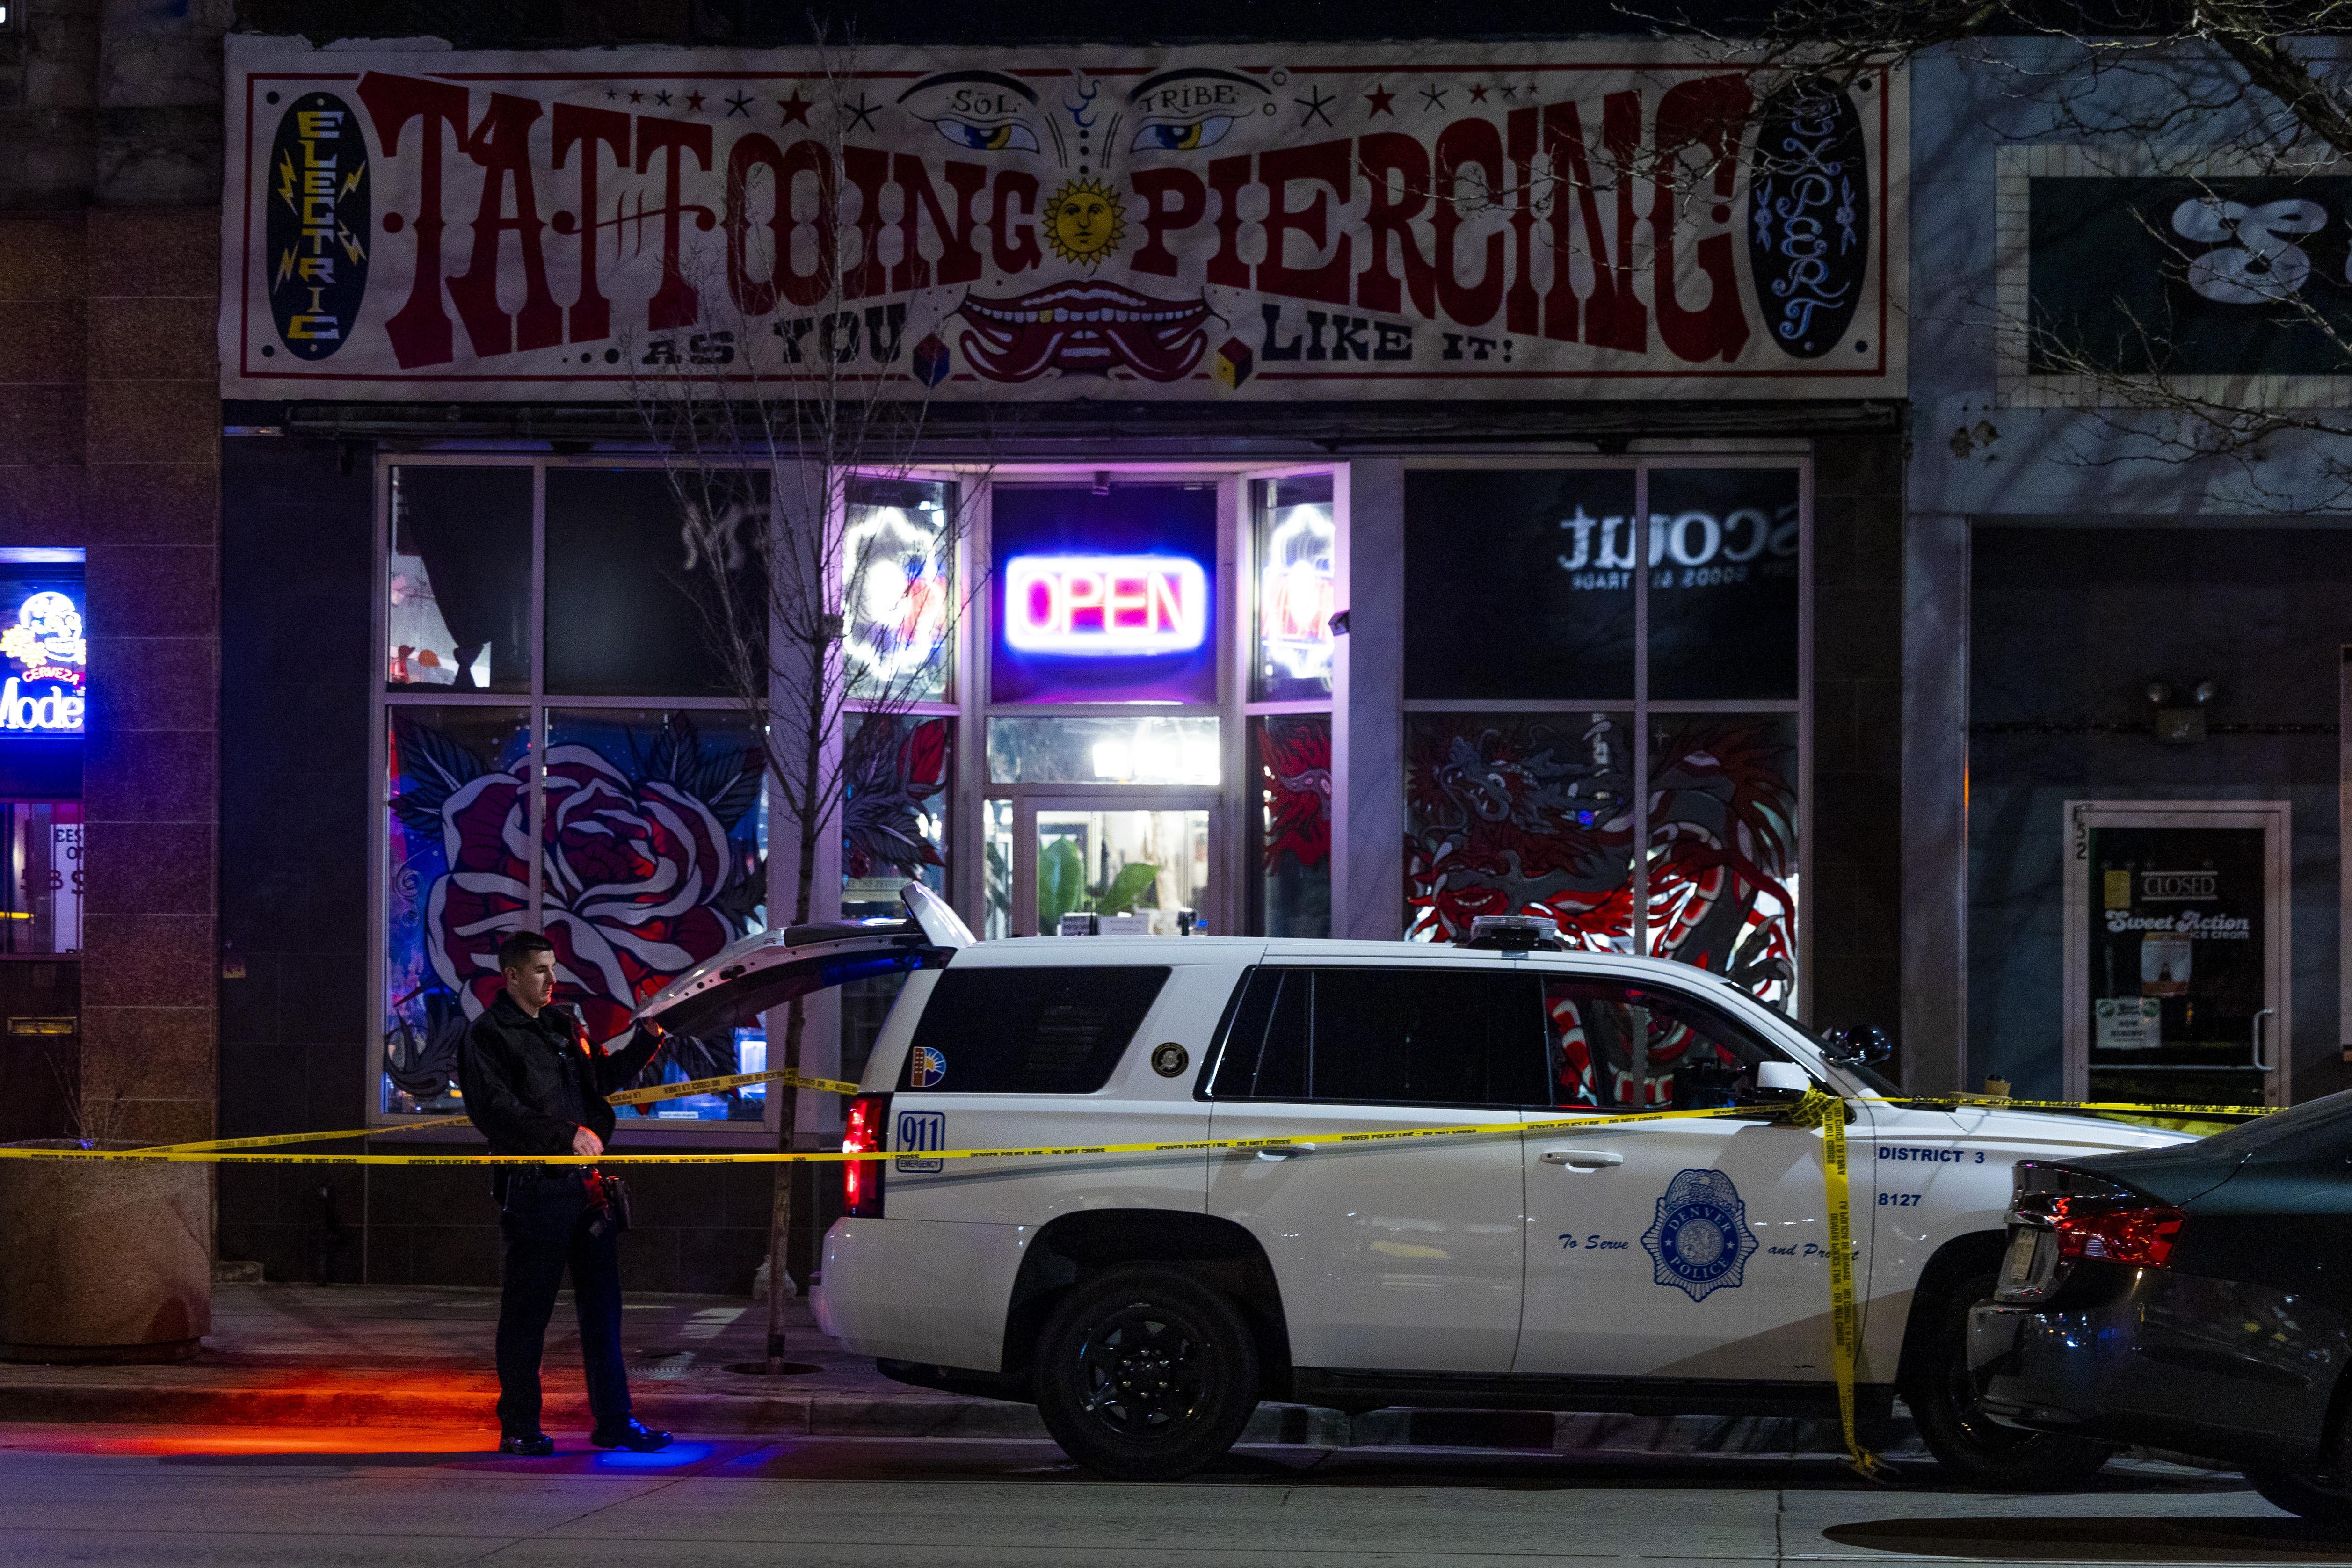 A police car, a police officer, and yellow caution tape in front of a tattoo shop at night